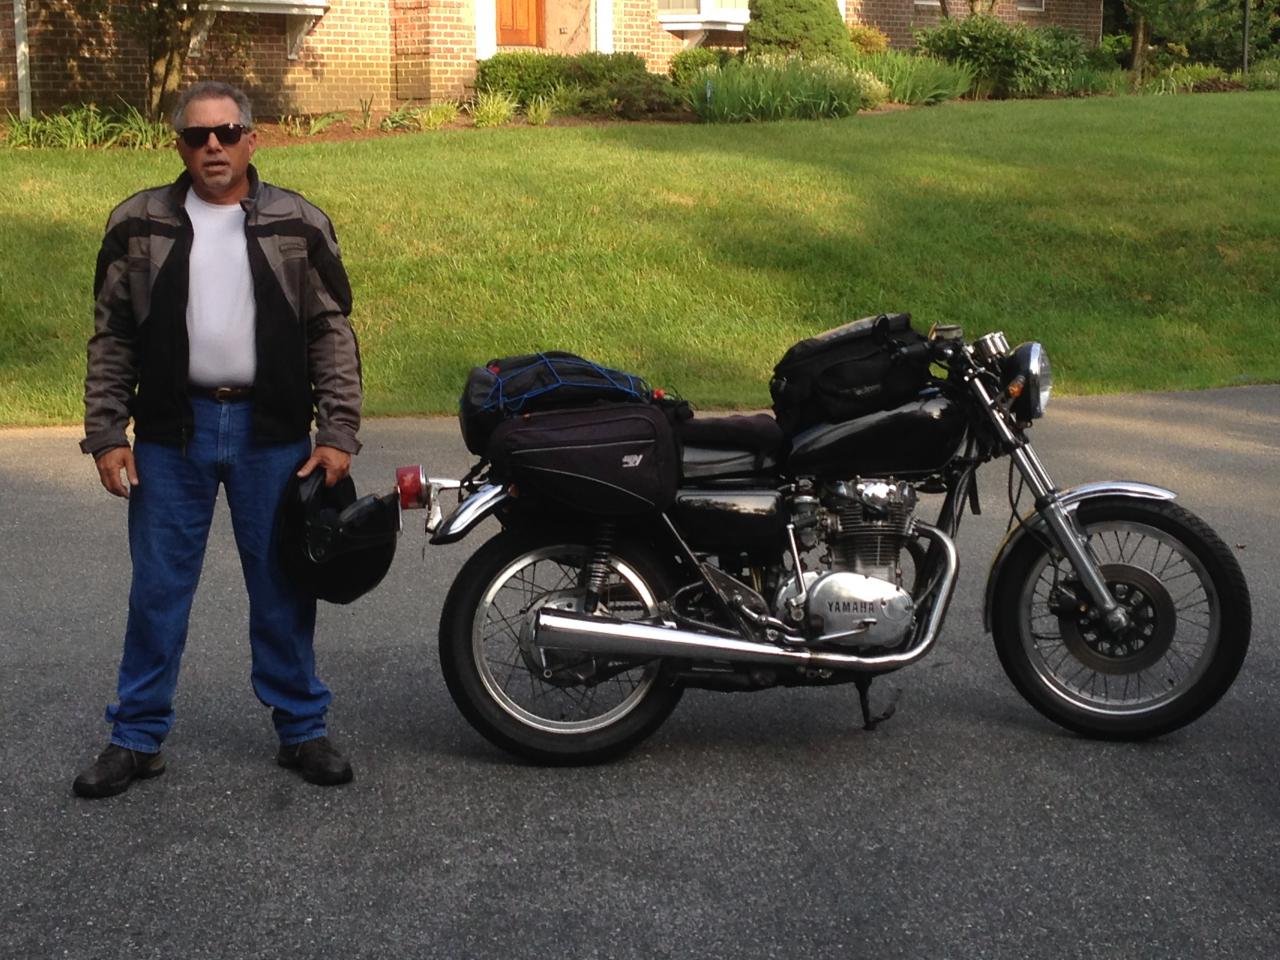 My bags are packed and I'm ready to roll: precursor to 2014 3,200 mile road trip from Baltimore to the national VJMC rally at Spring Mill Indiana, Law